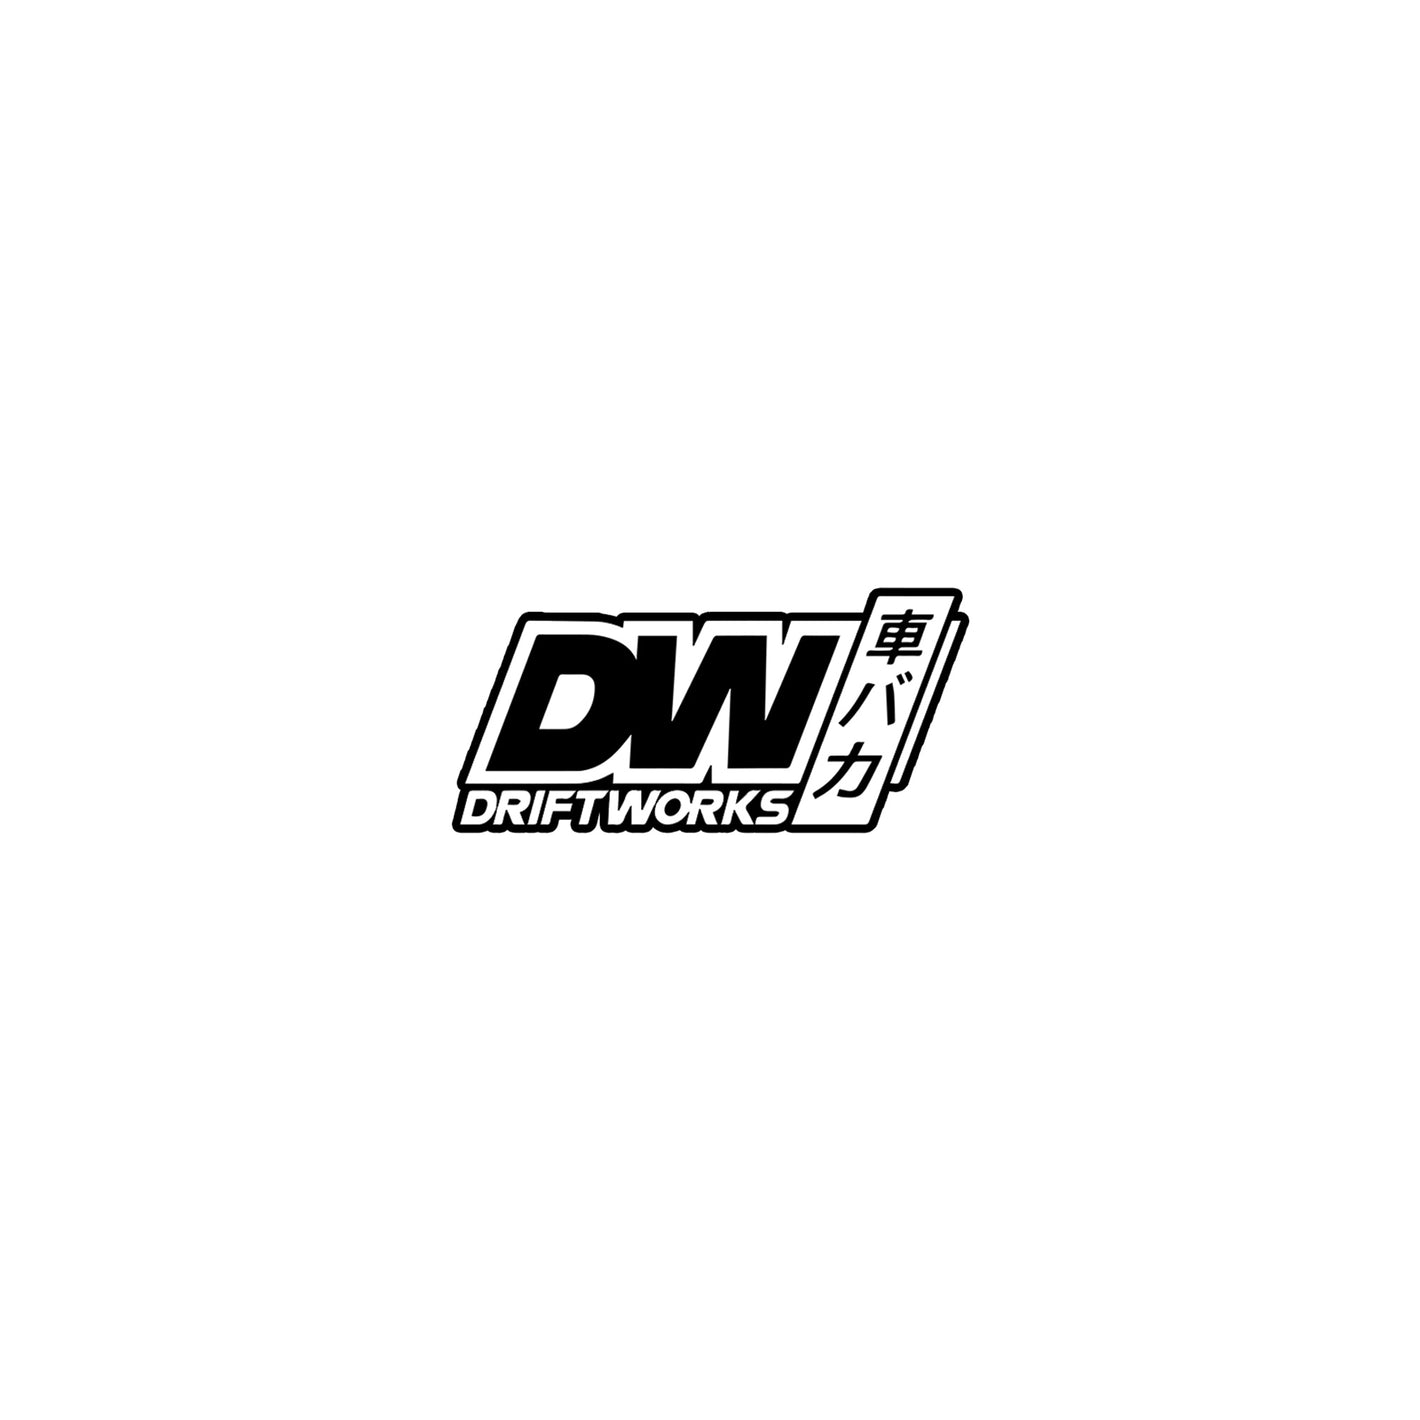 All Driftworks Products